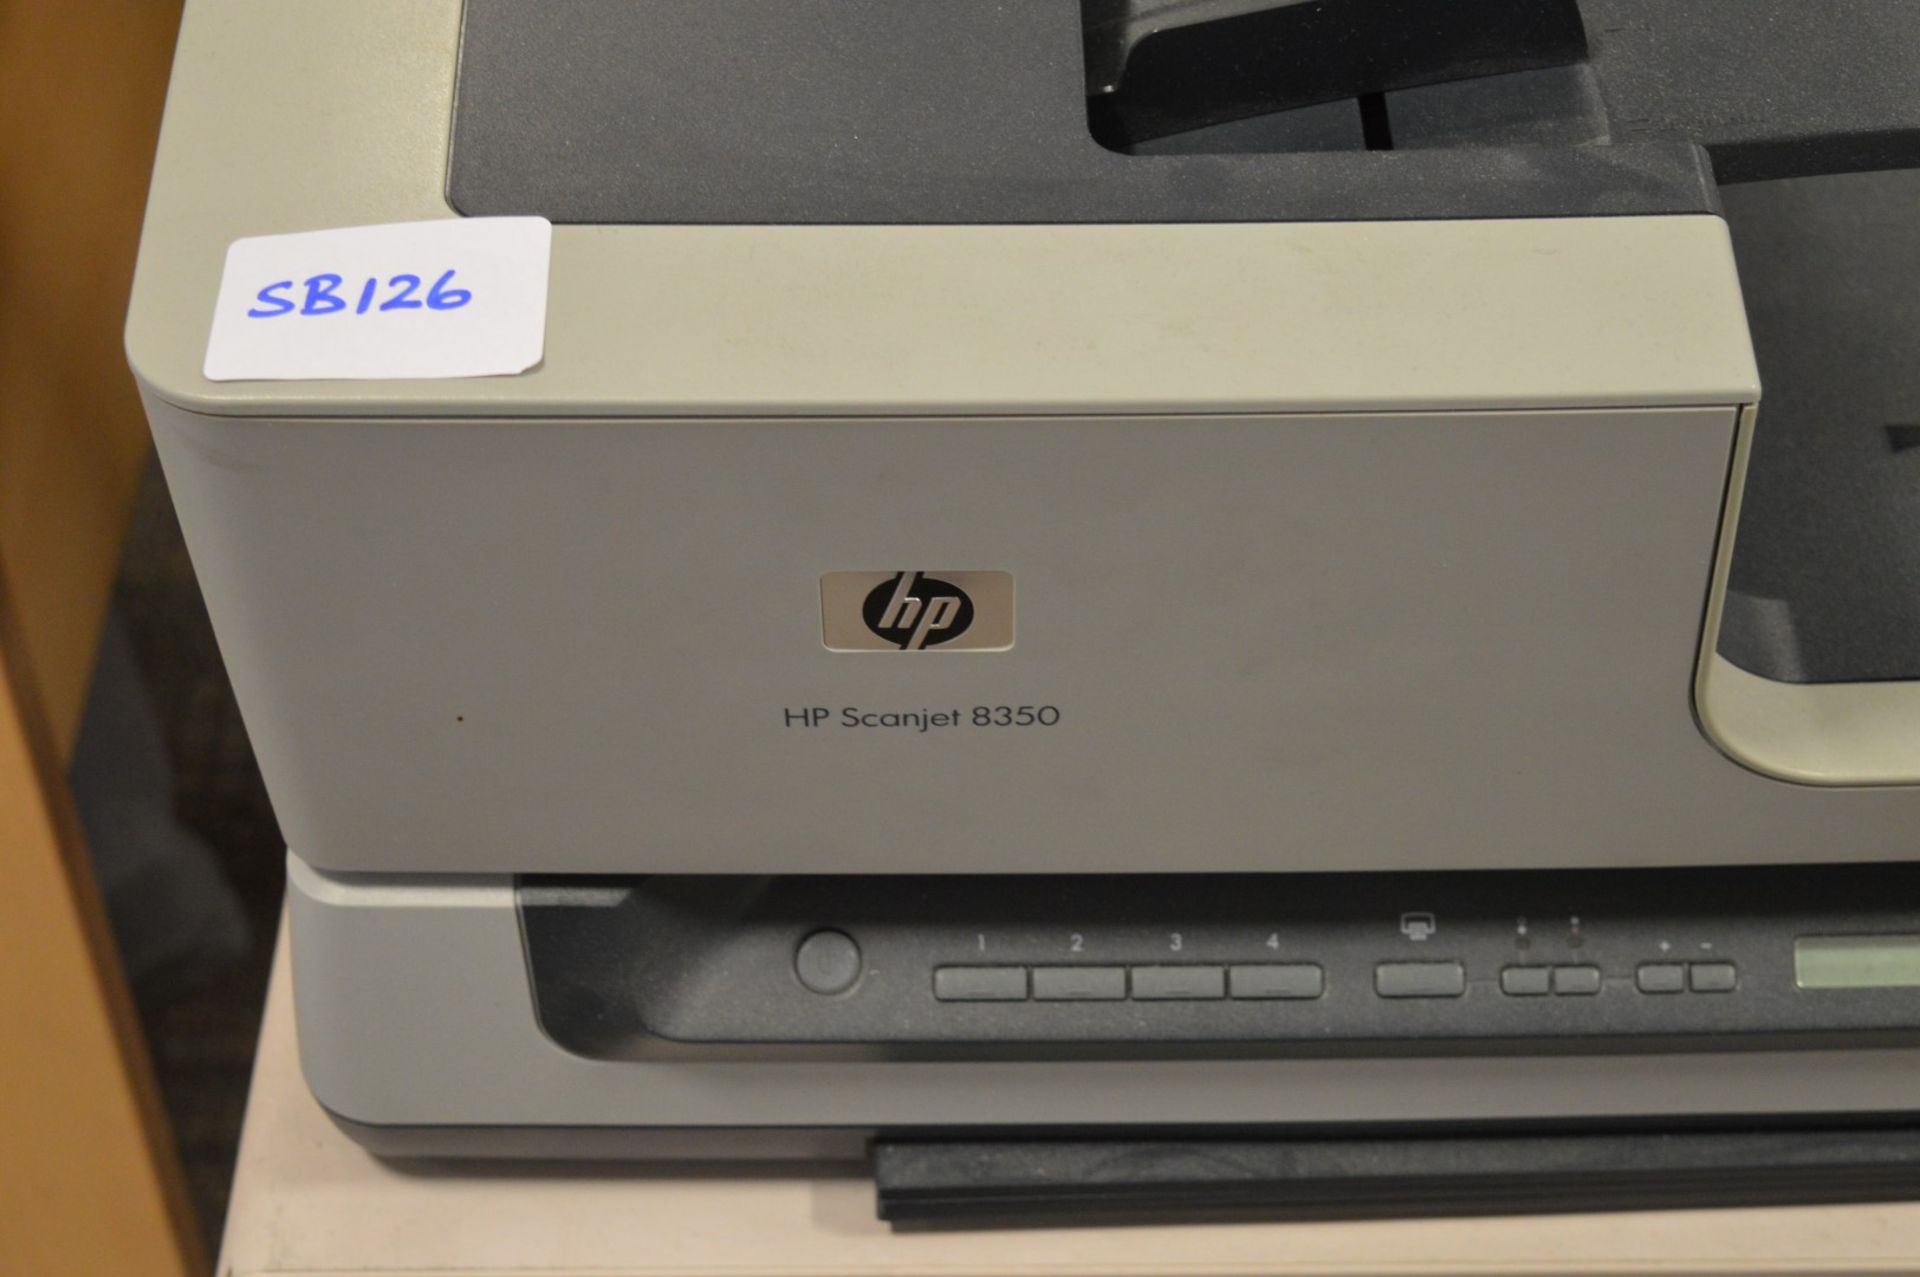 1 x HP Scanjet 8350 Document Scanner - 4800 dpi x 4800 dpi - With Drawer Pedestal Cabinet Stand - - Image 3 of 3